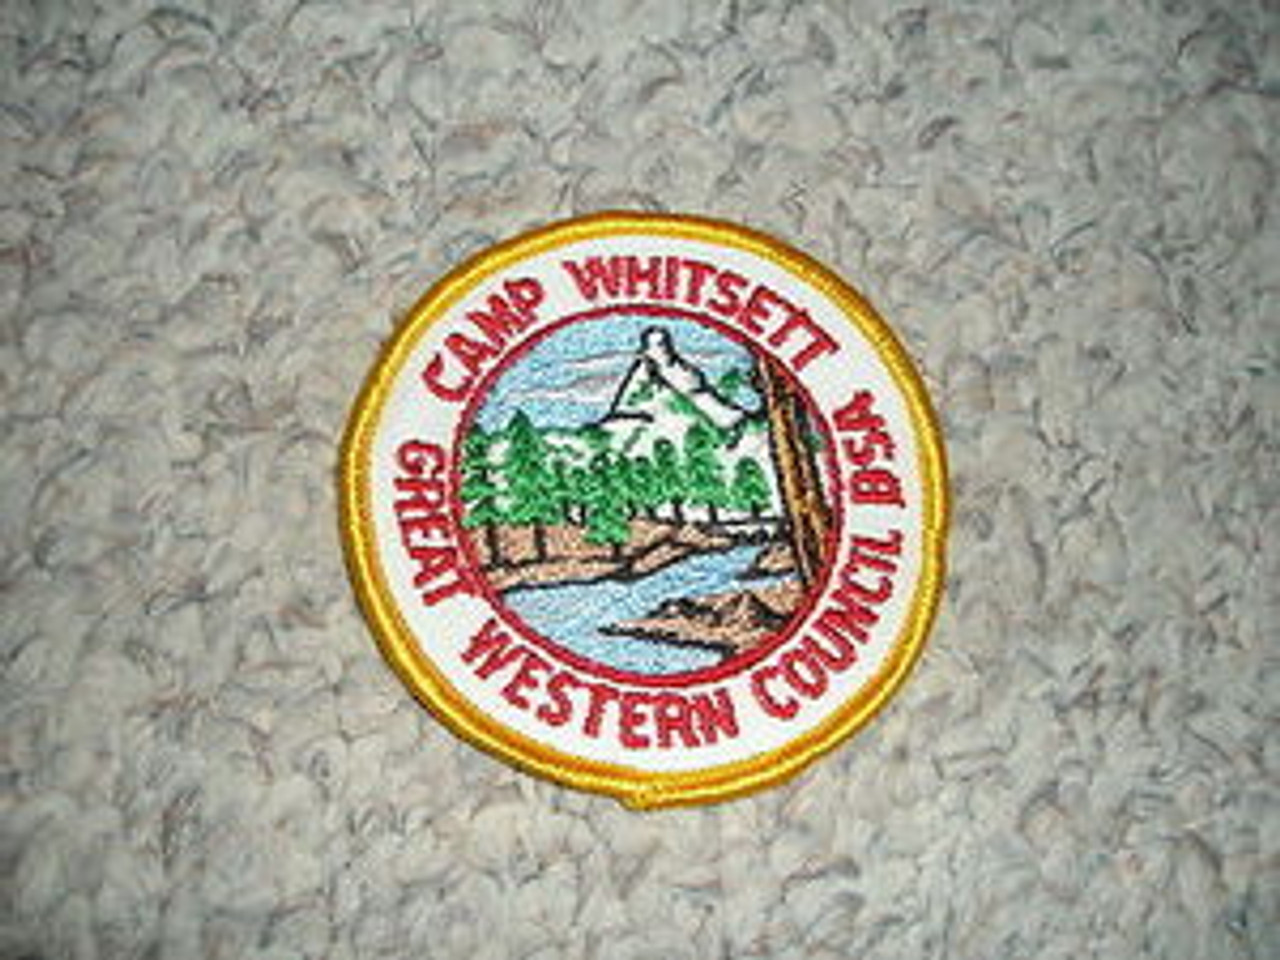 1981 Camp Whitsett Patch - Scout